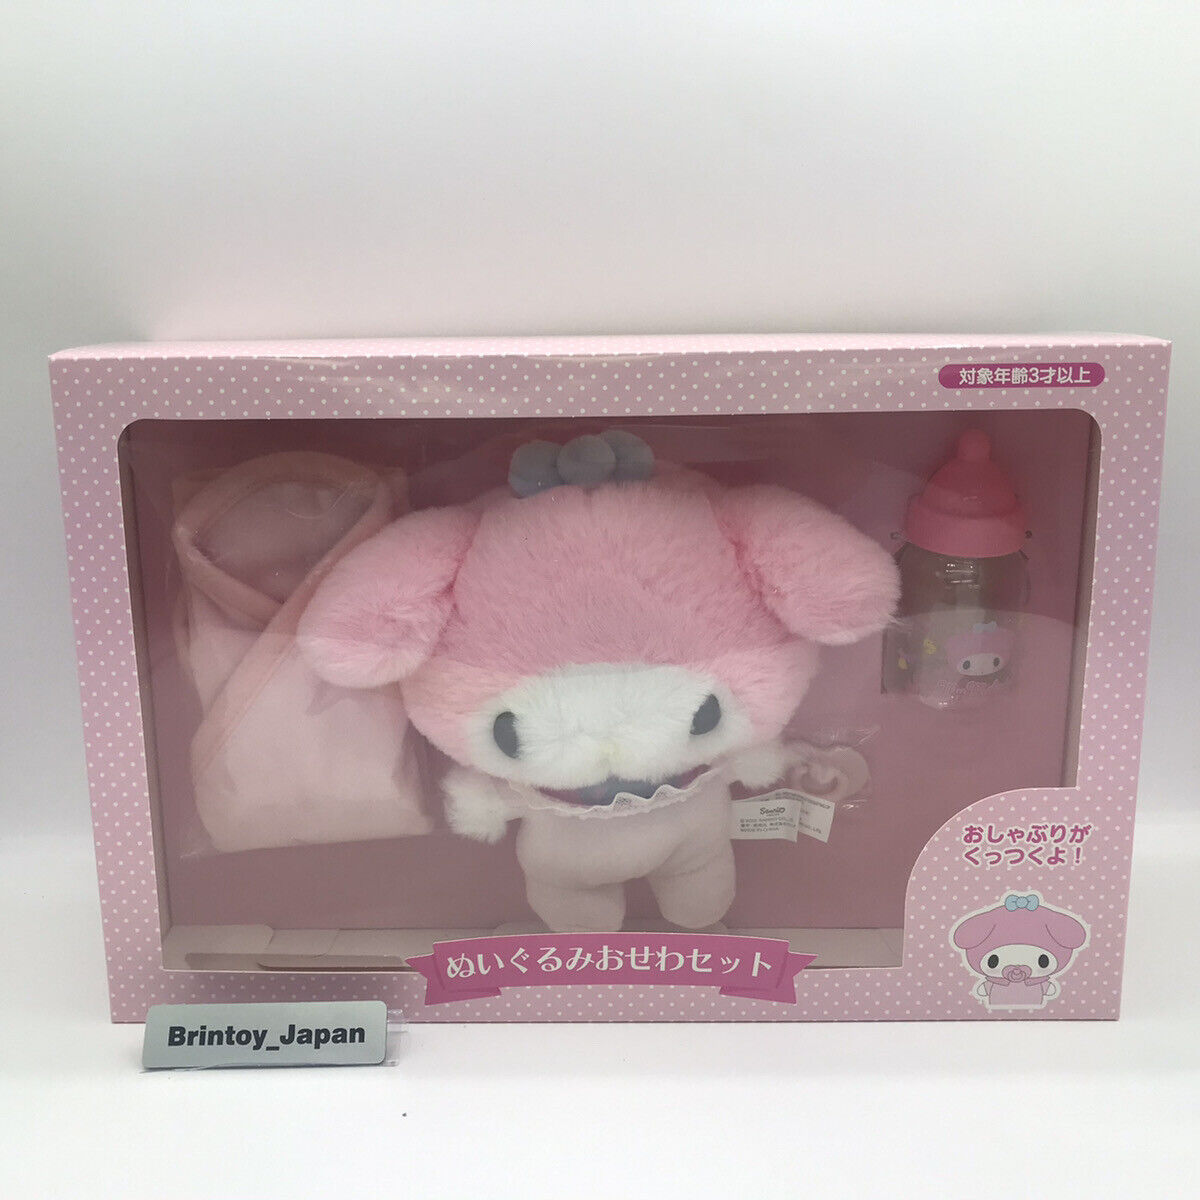 Sanrio Official My Melody Baby Care Set Plush Toy Doll Character Goods